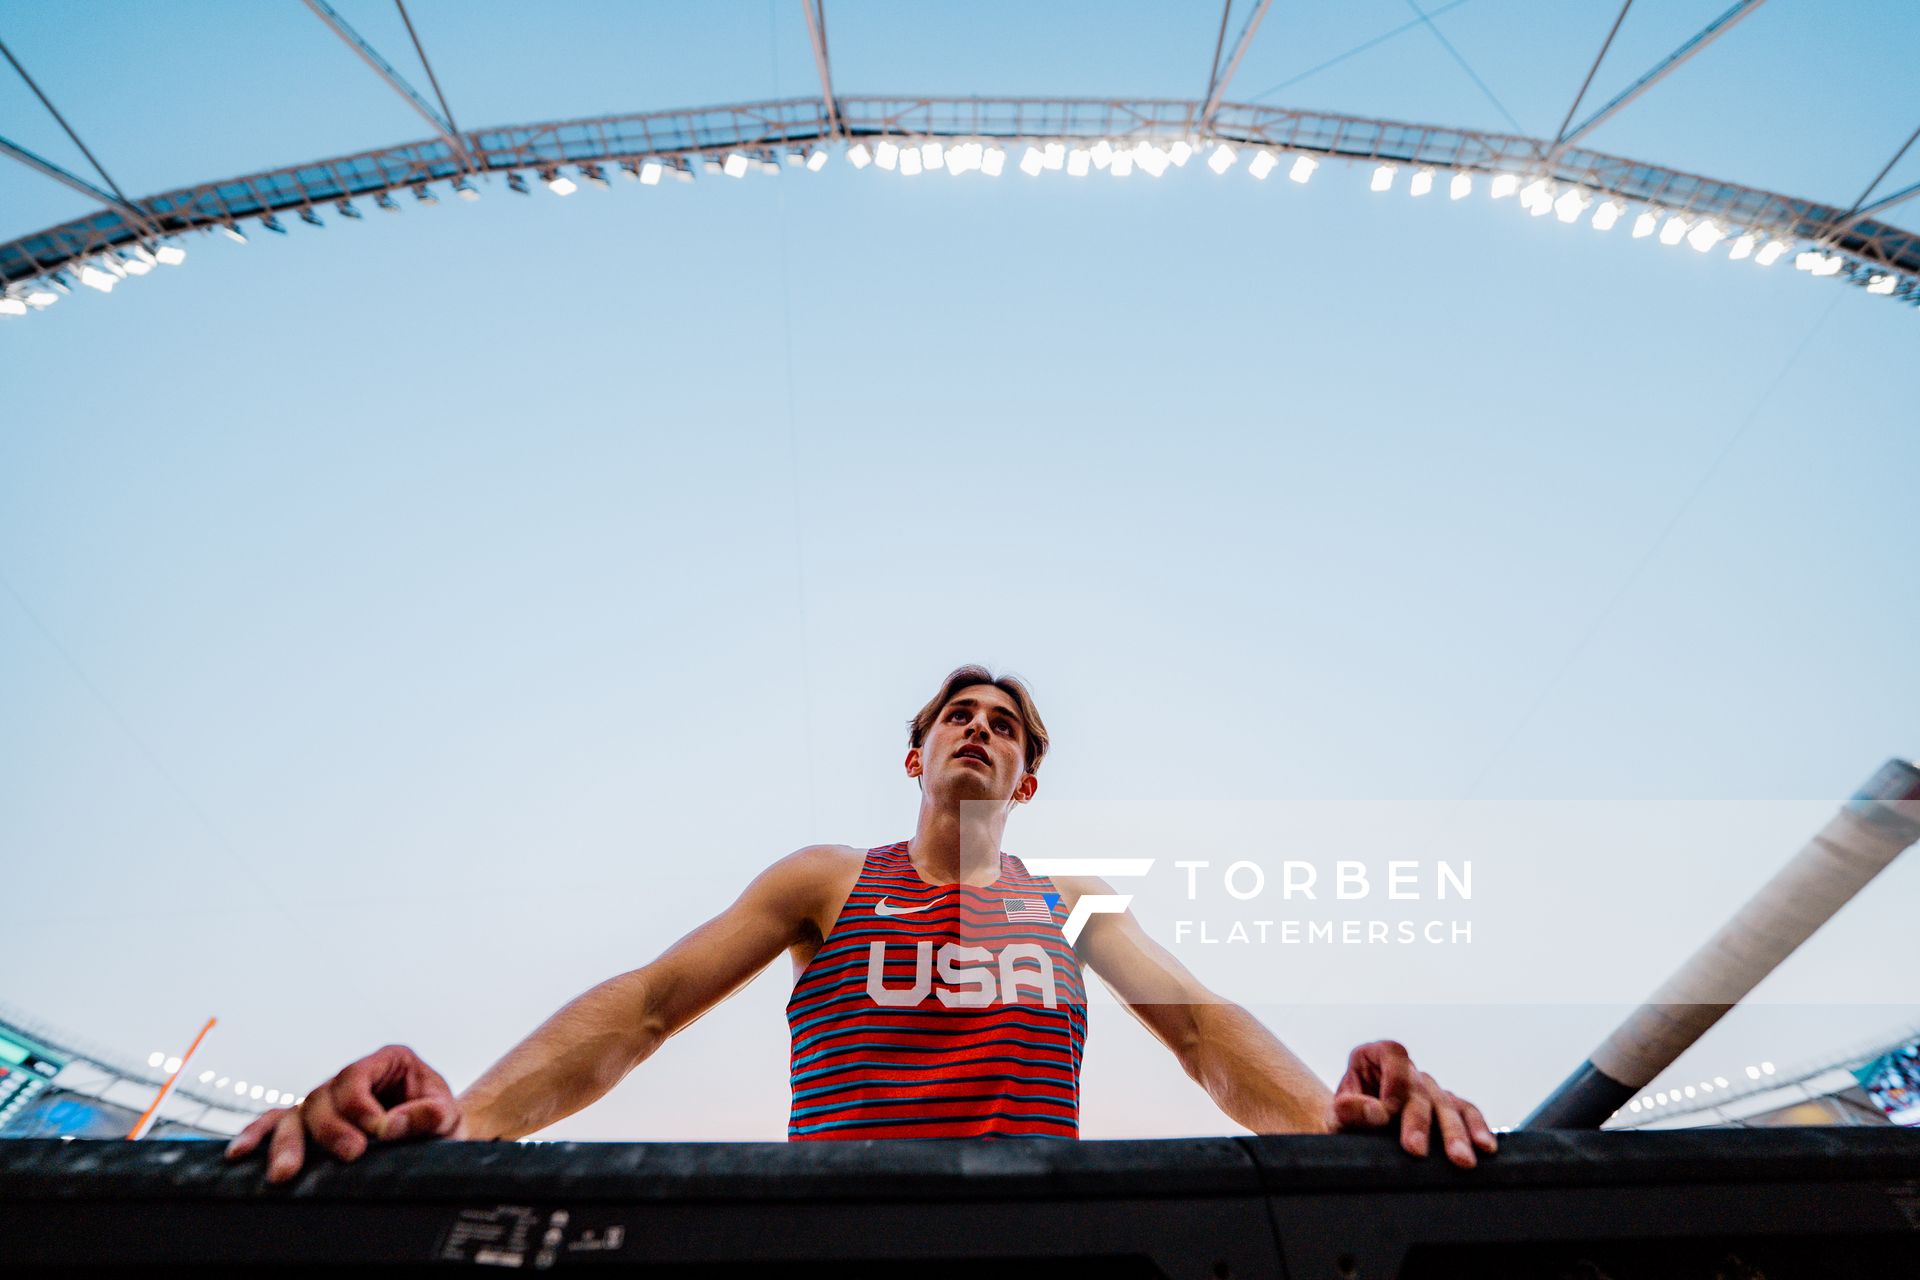 Zach Mcwhorter (USA/United States) during the Pole Vault on Day 8 of the World Athletics Championships Budapest 23 at the National Athletics Centre in Budapest, Hungary on August 26, 2023.